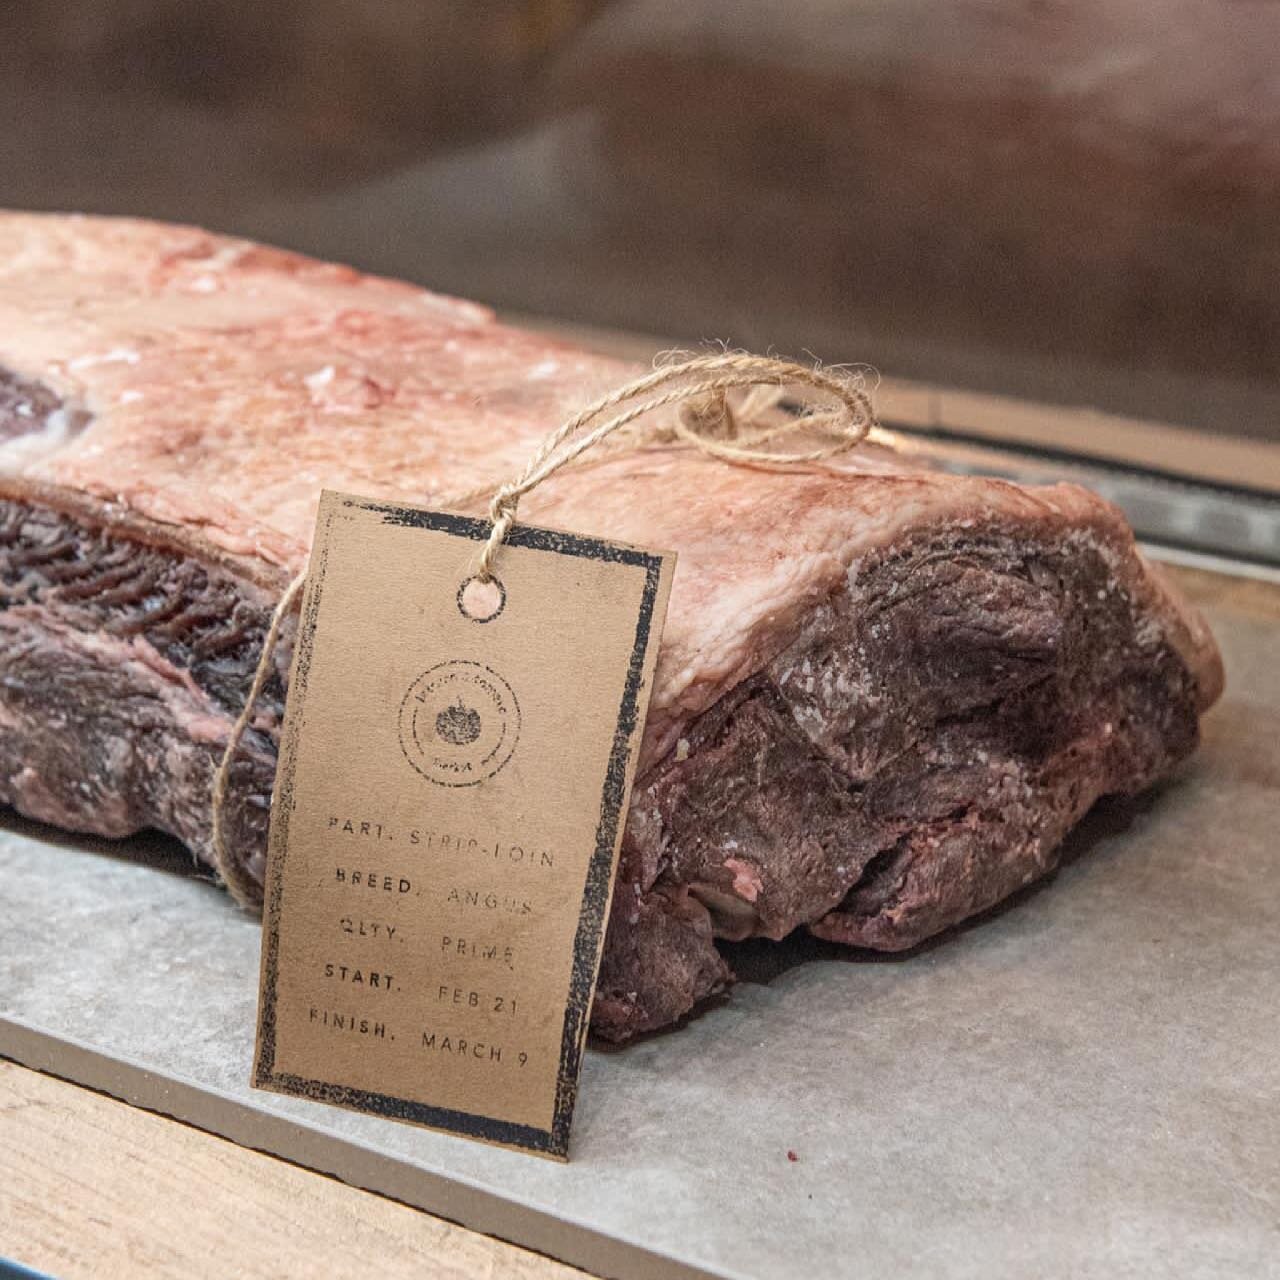 Did you know L&amp;T Market + Eatery dry ages its steaks? Dry aging allows for the best flavor profiles of your beef to come through. Grab a portioned steak to take home or have it for dine in.

#lettuceandtomato #northmiamibeach #miamishores #chefdr